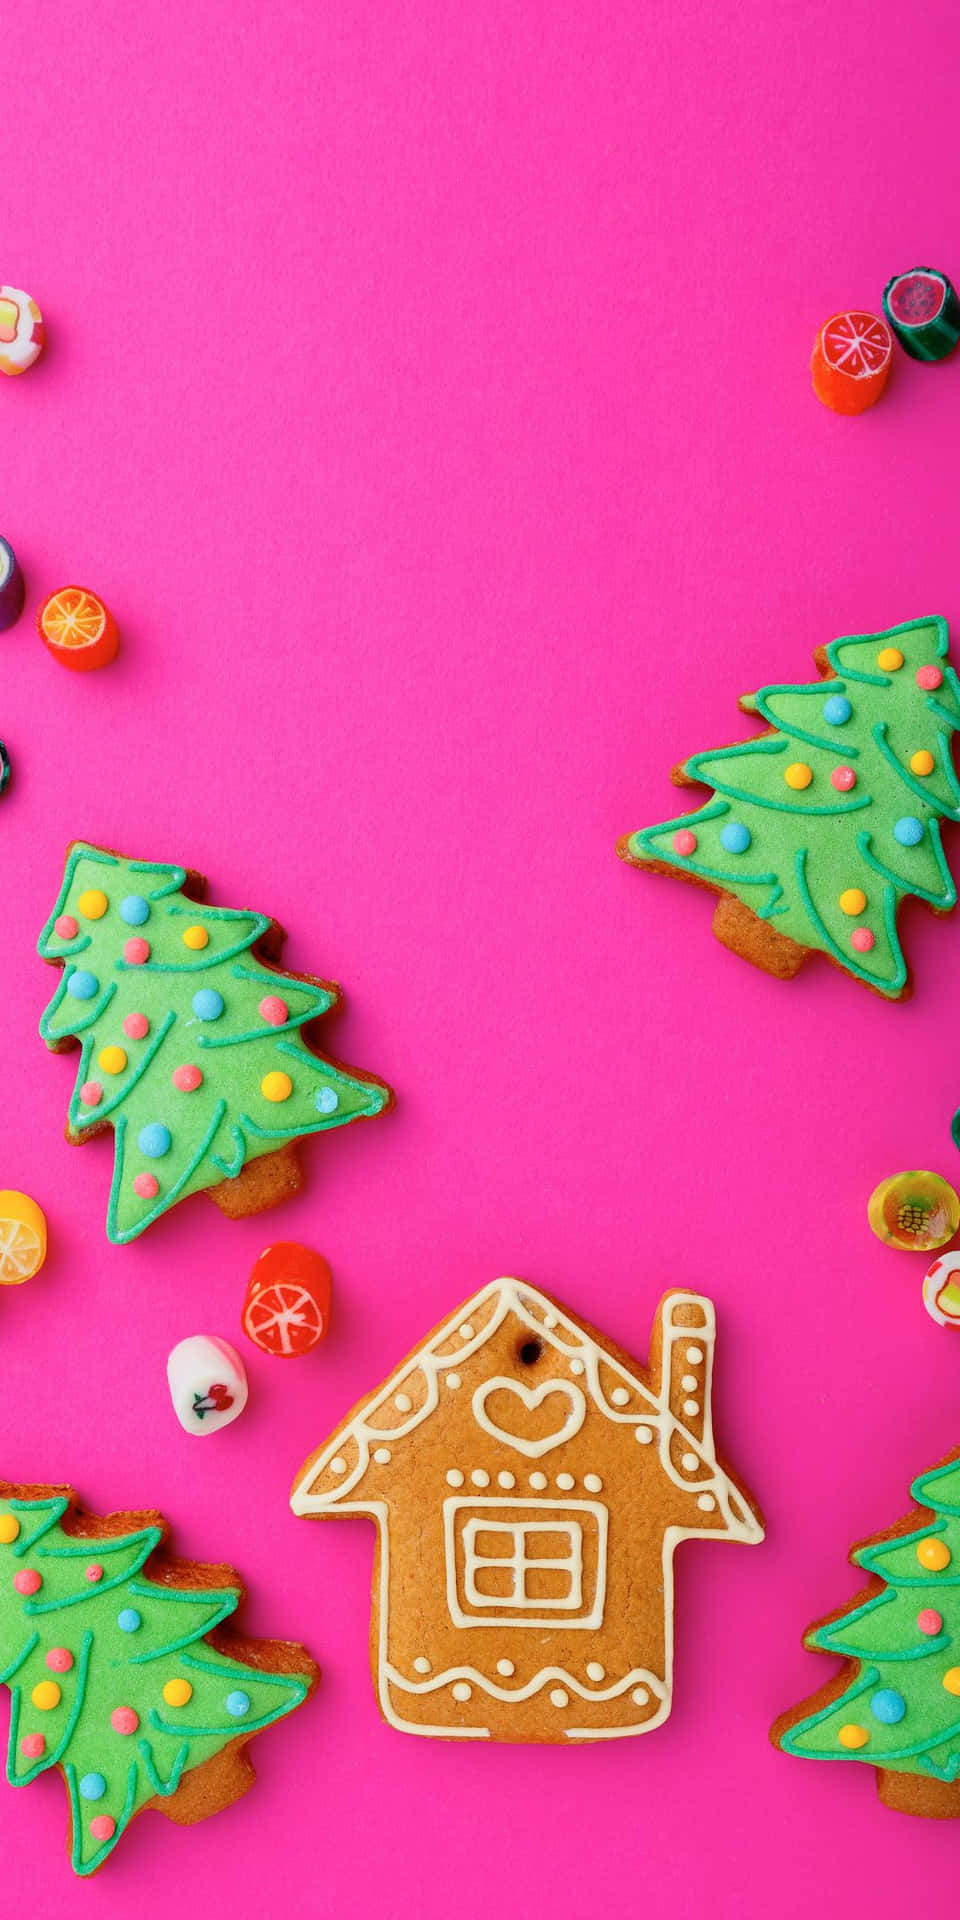 Gingerbread Cookies And Candies On A Pink Background